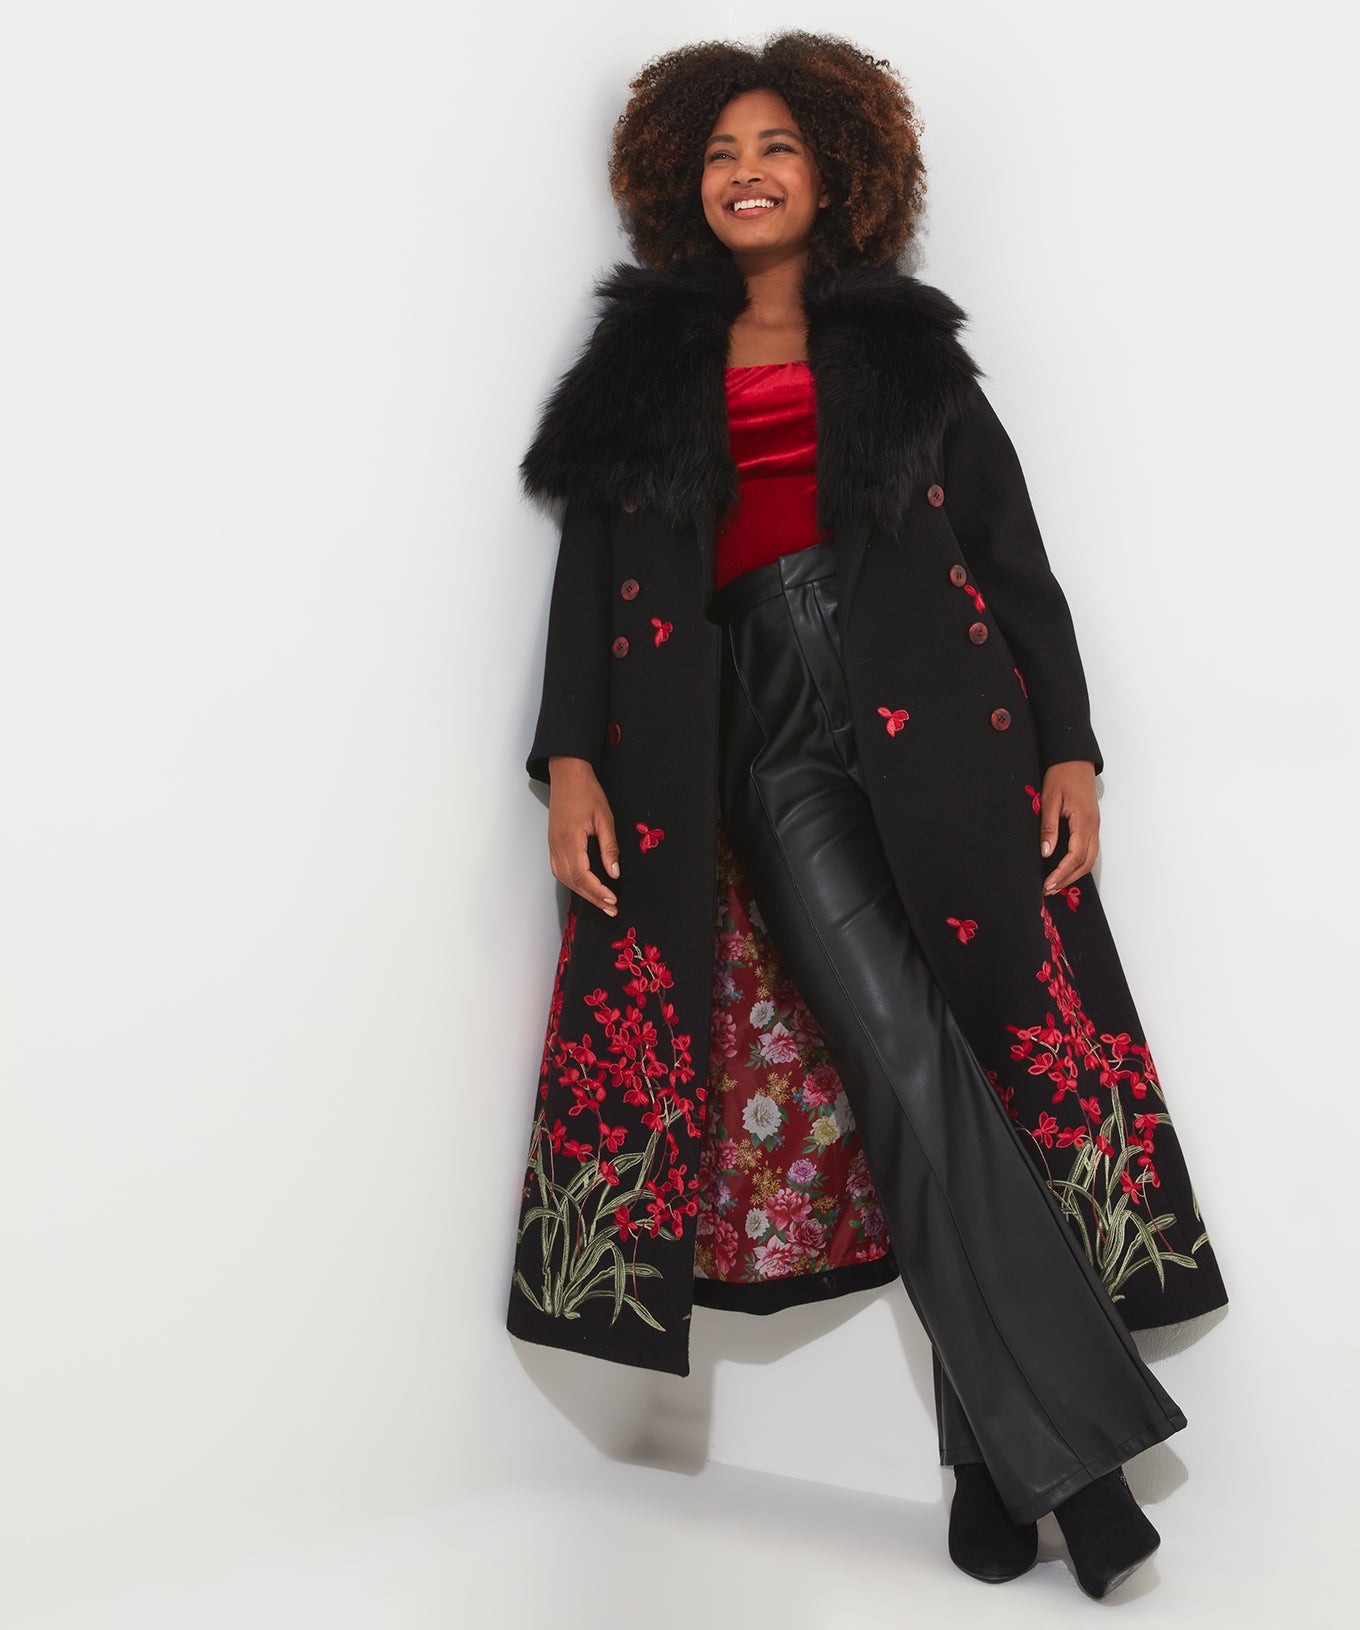 Red Roses Boutique Joe Browns Coat